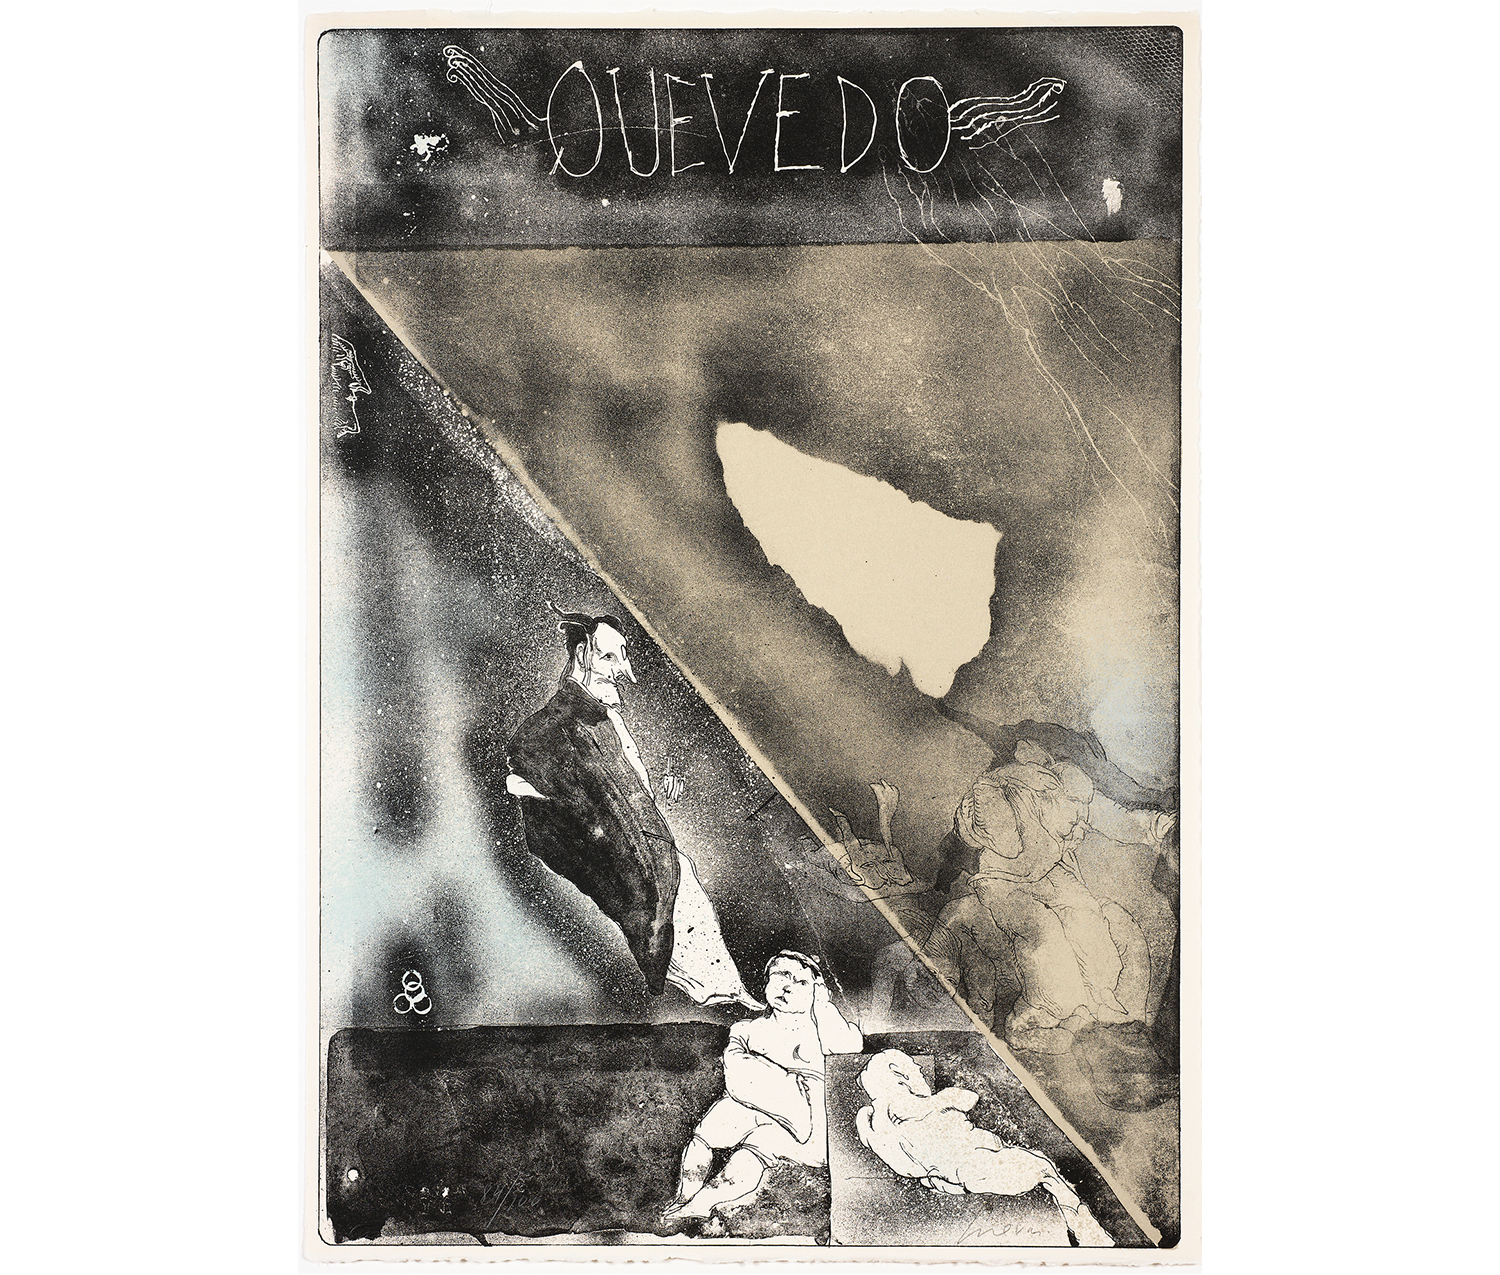 collage of various figures and dark shapes. on the top, text reads "QUEVEDO"